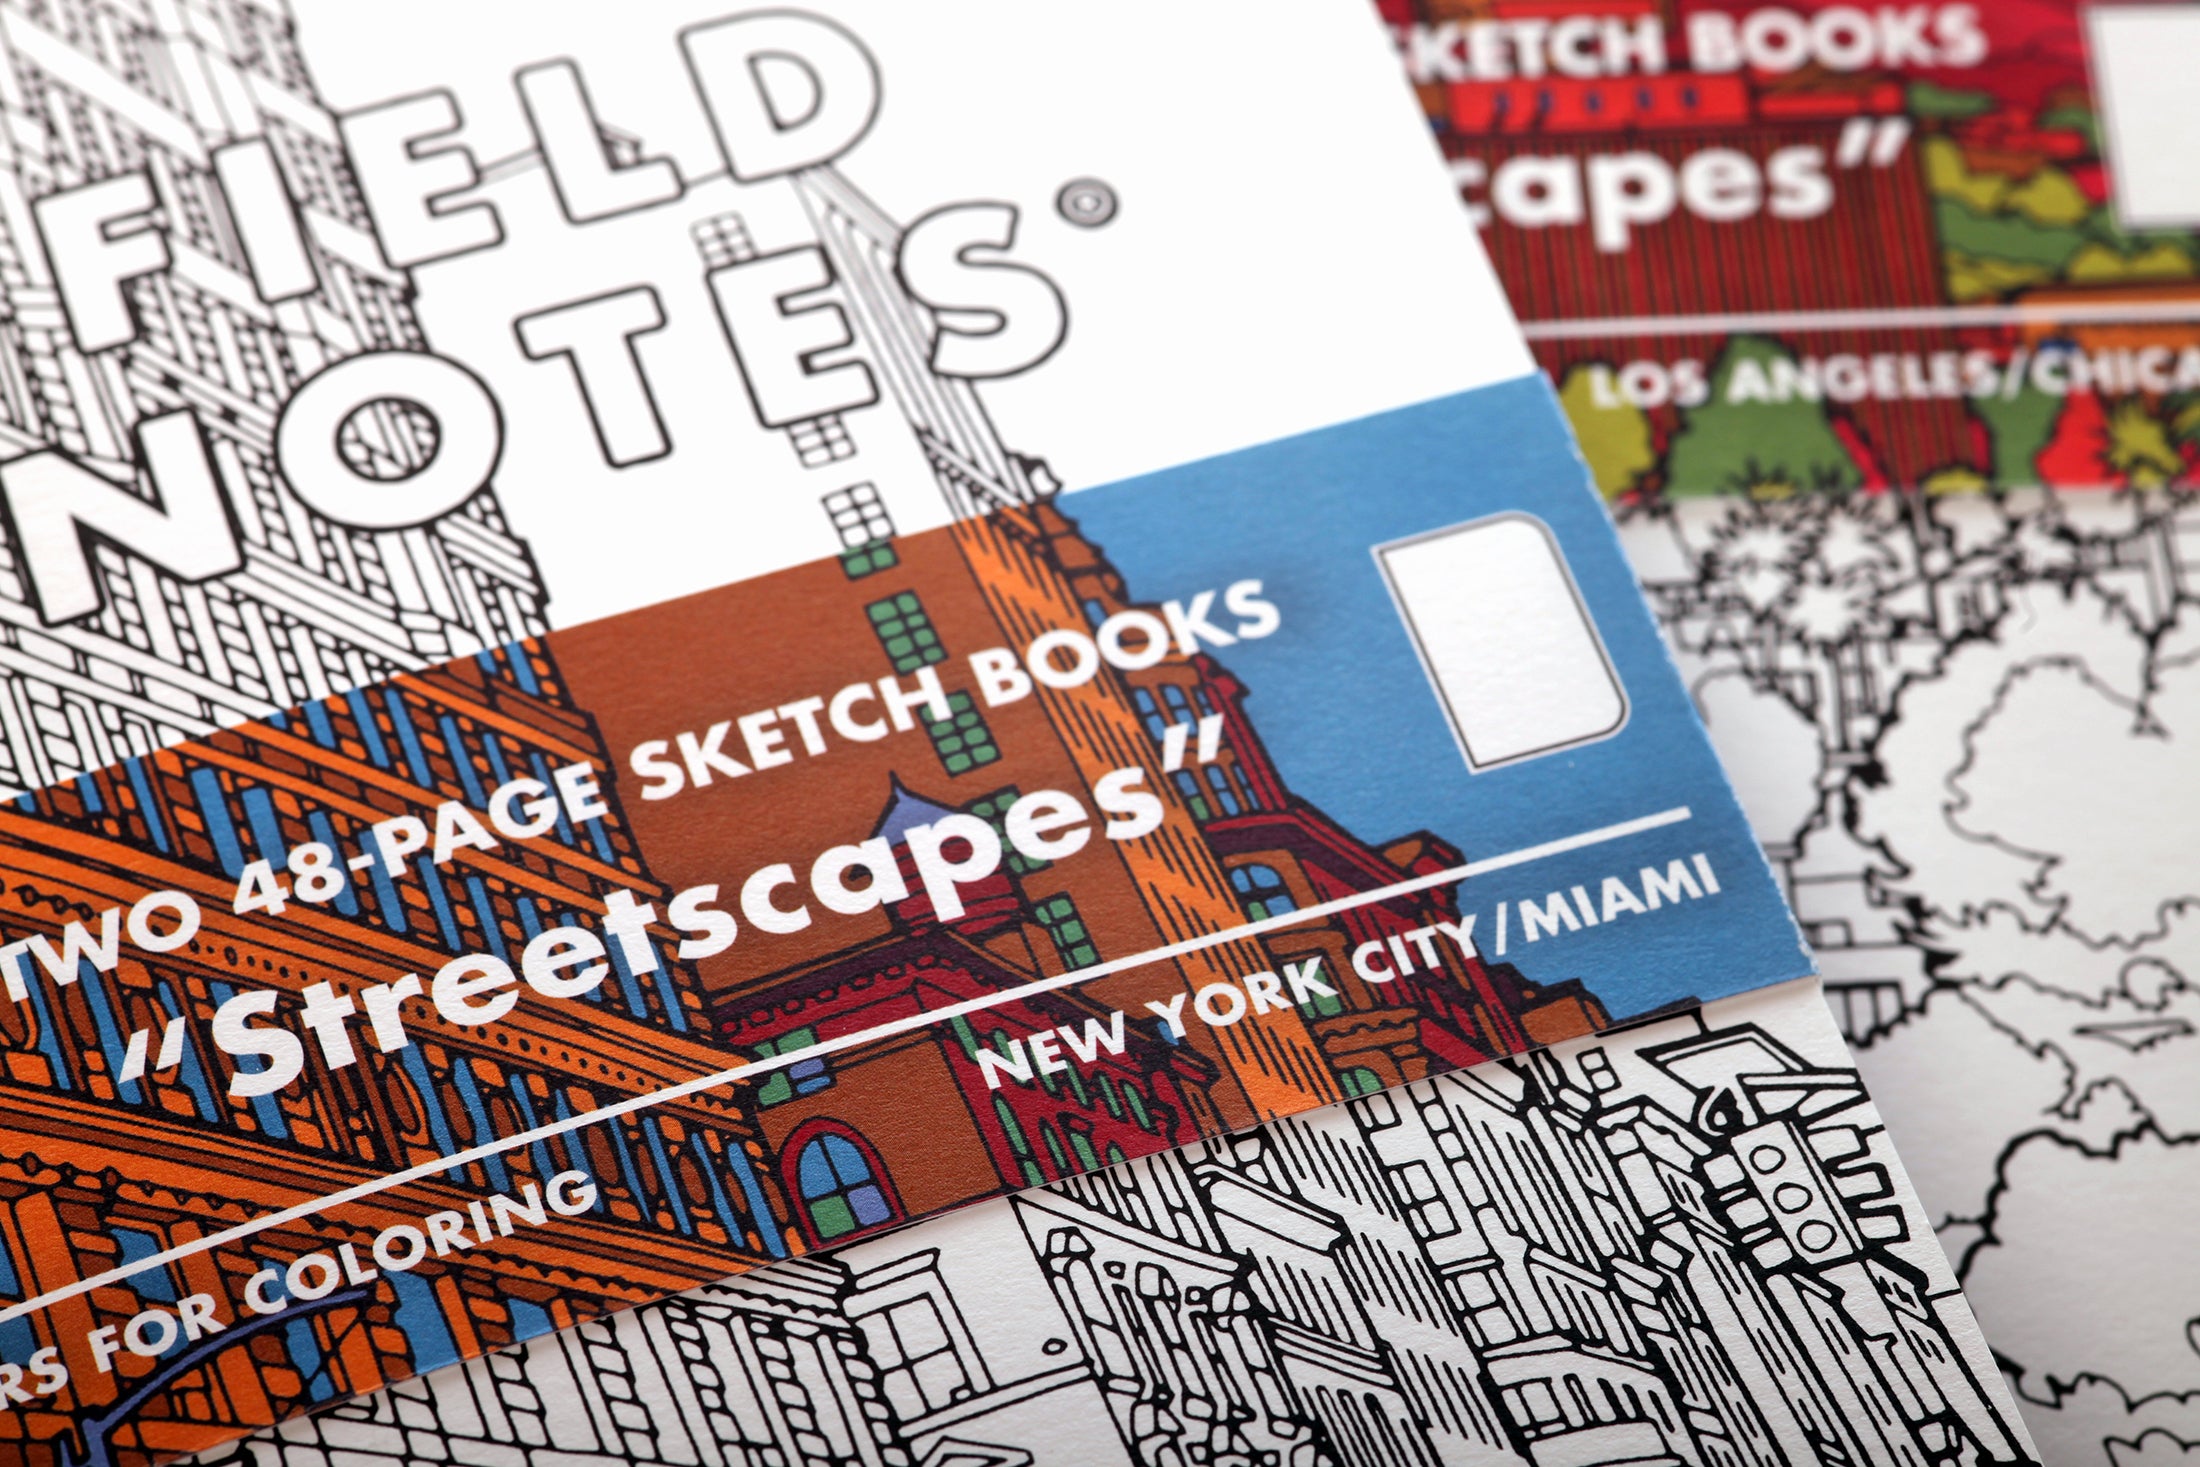 FIELD NOTES: 2-PACK "Streetscapes" Sketchbooks